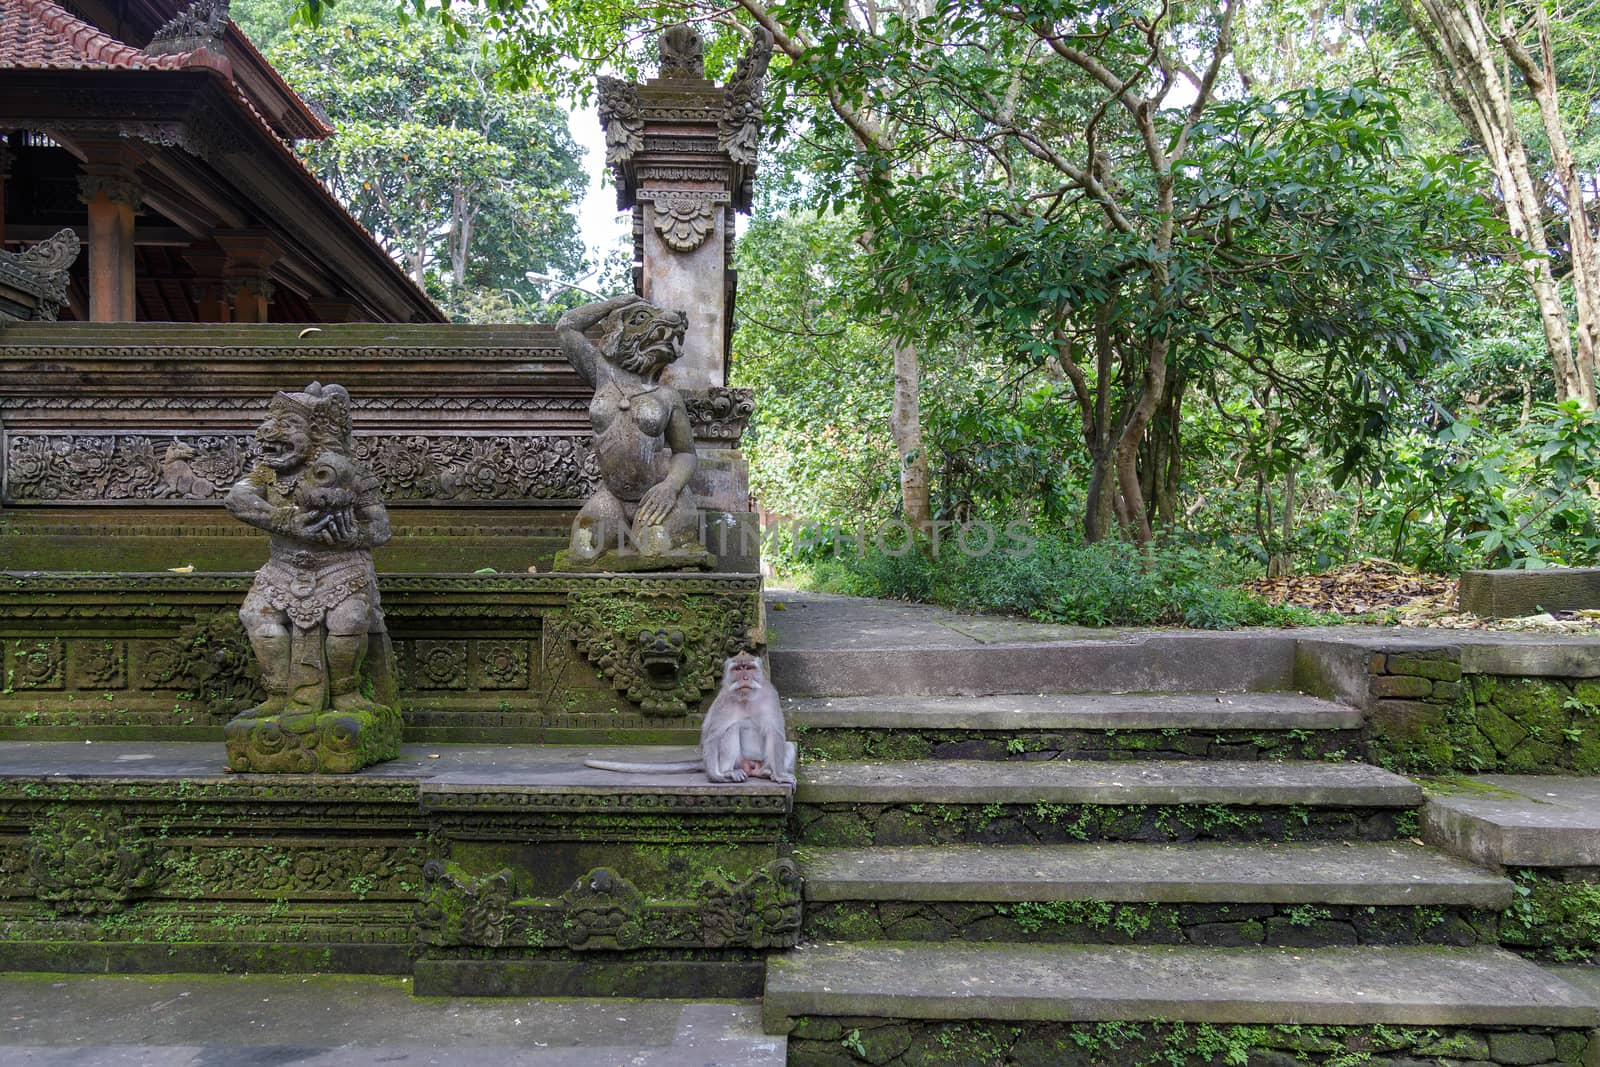 Monkey seat on an old stone temple. Concept of animal care, travel and wildlife observation. by dugulan